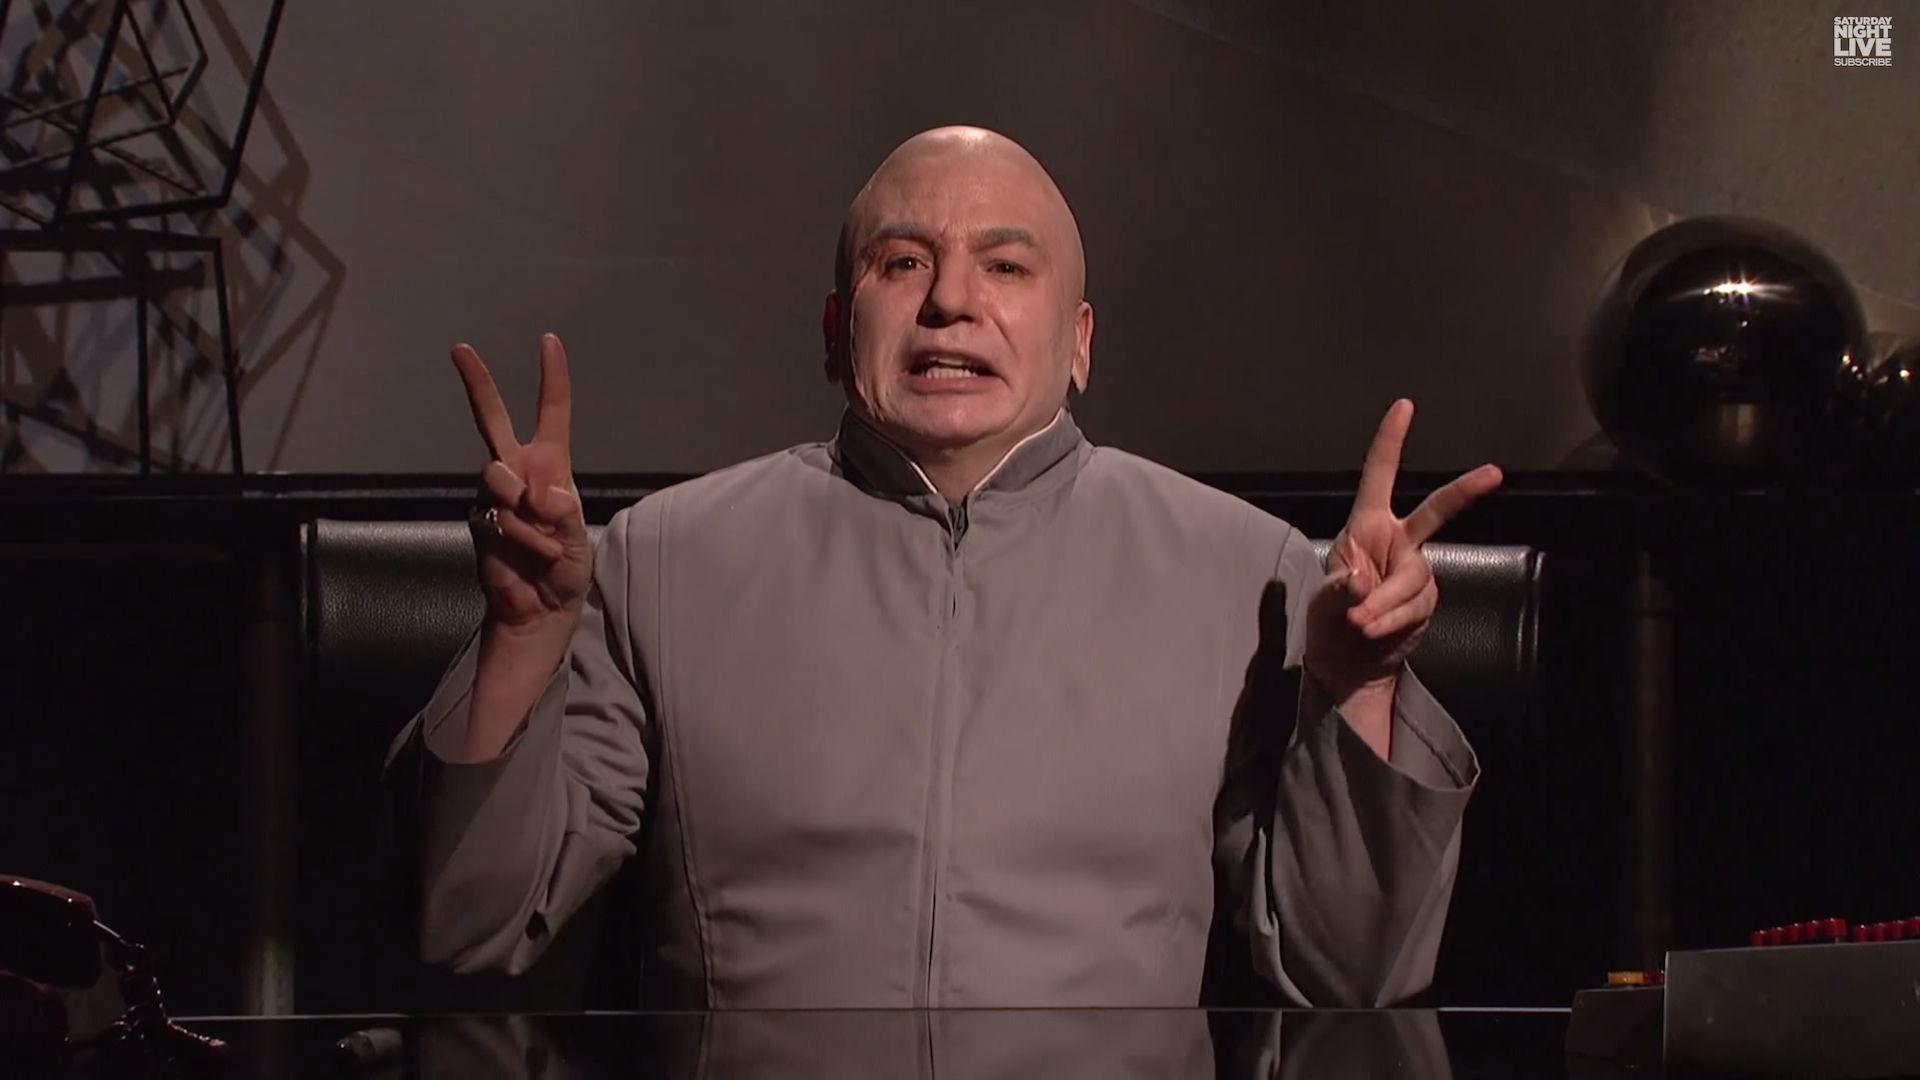 FLOOD. WATCH: Dr. Evil Returns to Address “The Interview” Fiasco